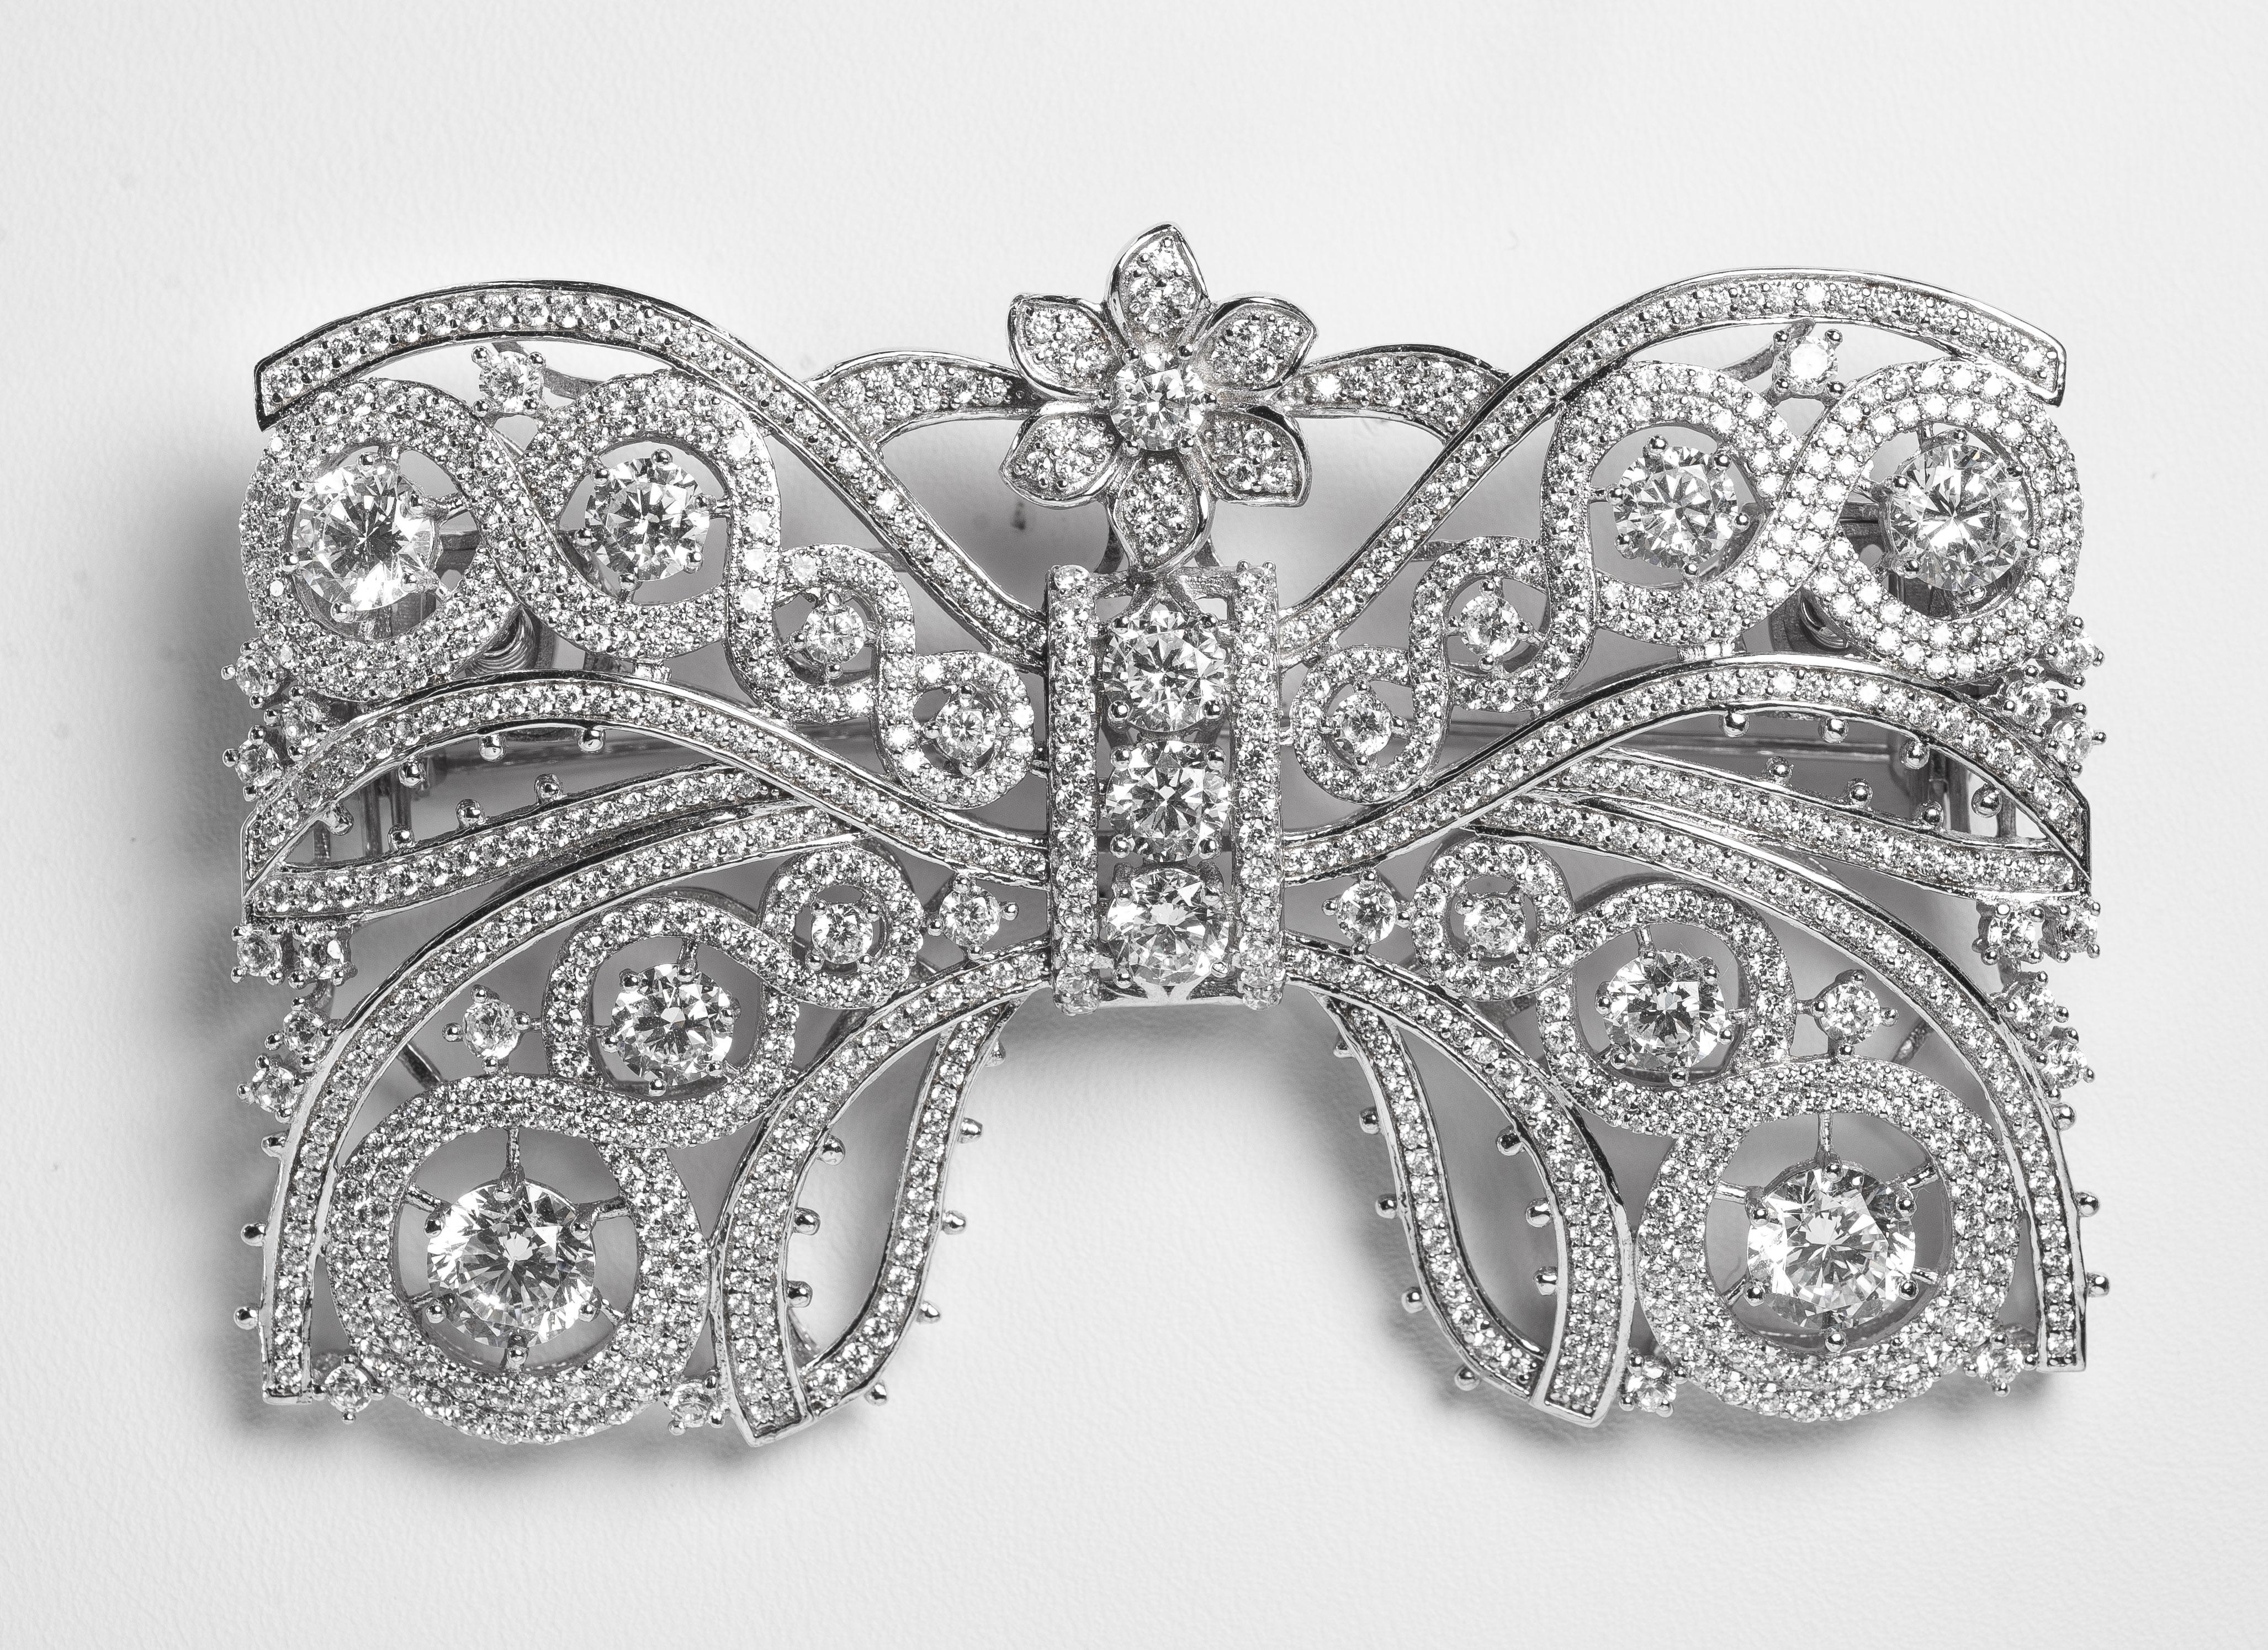 
Cartier Inspired  Garland Style Large CZDiamond Sterling Bow Pin
Marie Antoinette Collection garland style large faux diamond bow pin micro pave cubic zircons set in rhodium sterling makes this large 3'' wide by 2'' deep very much a statement